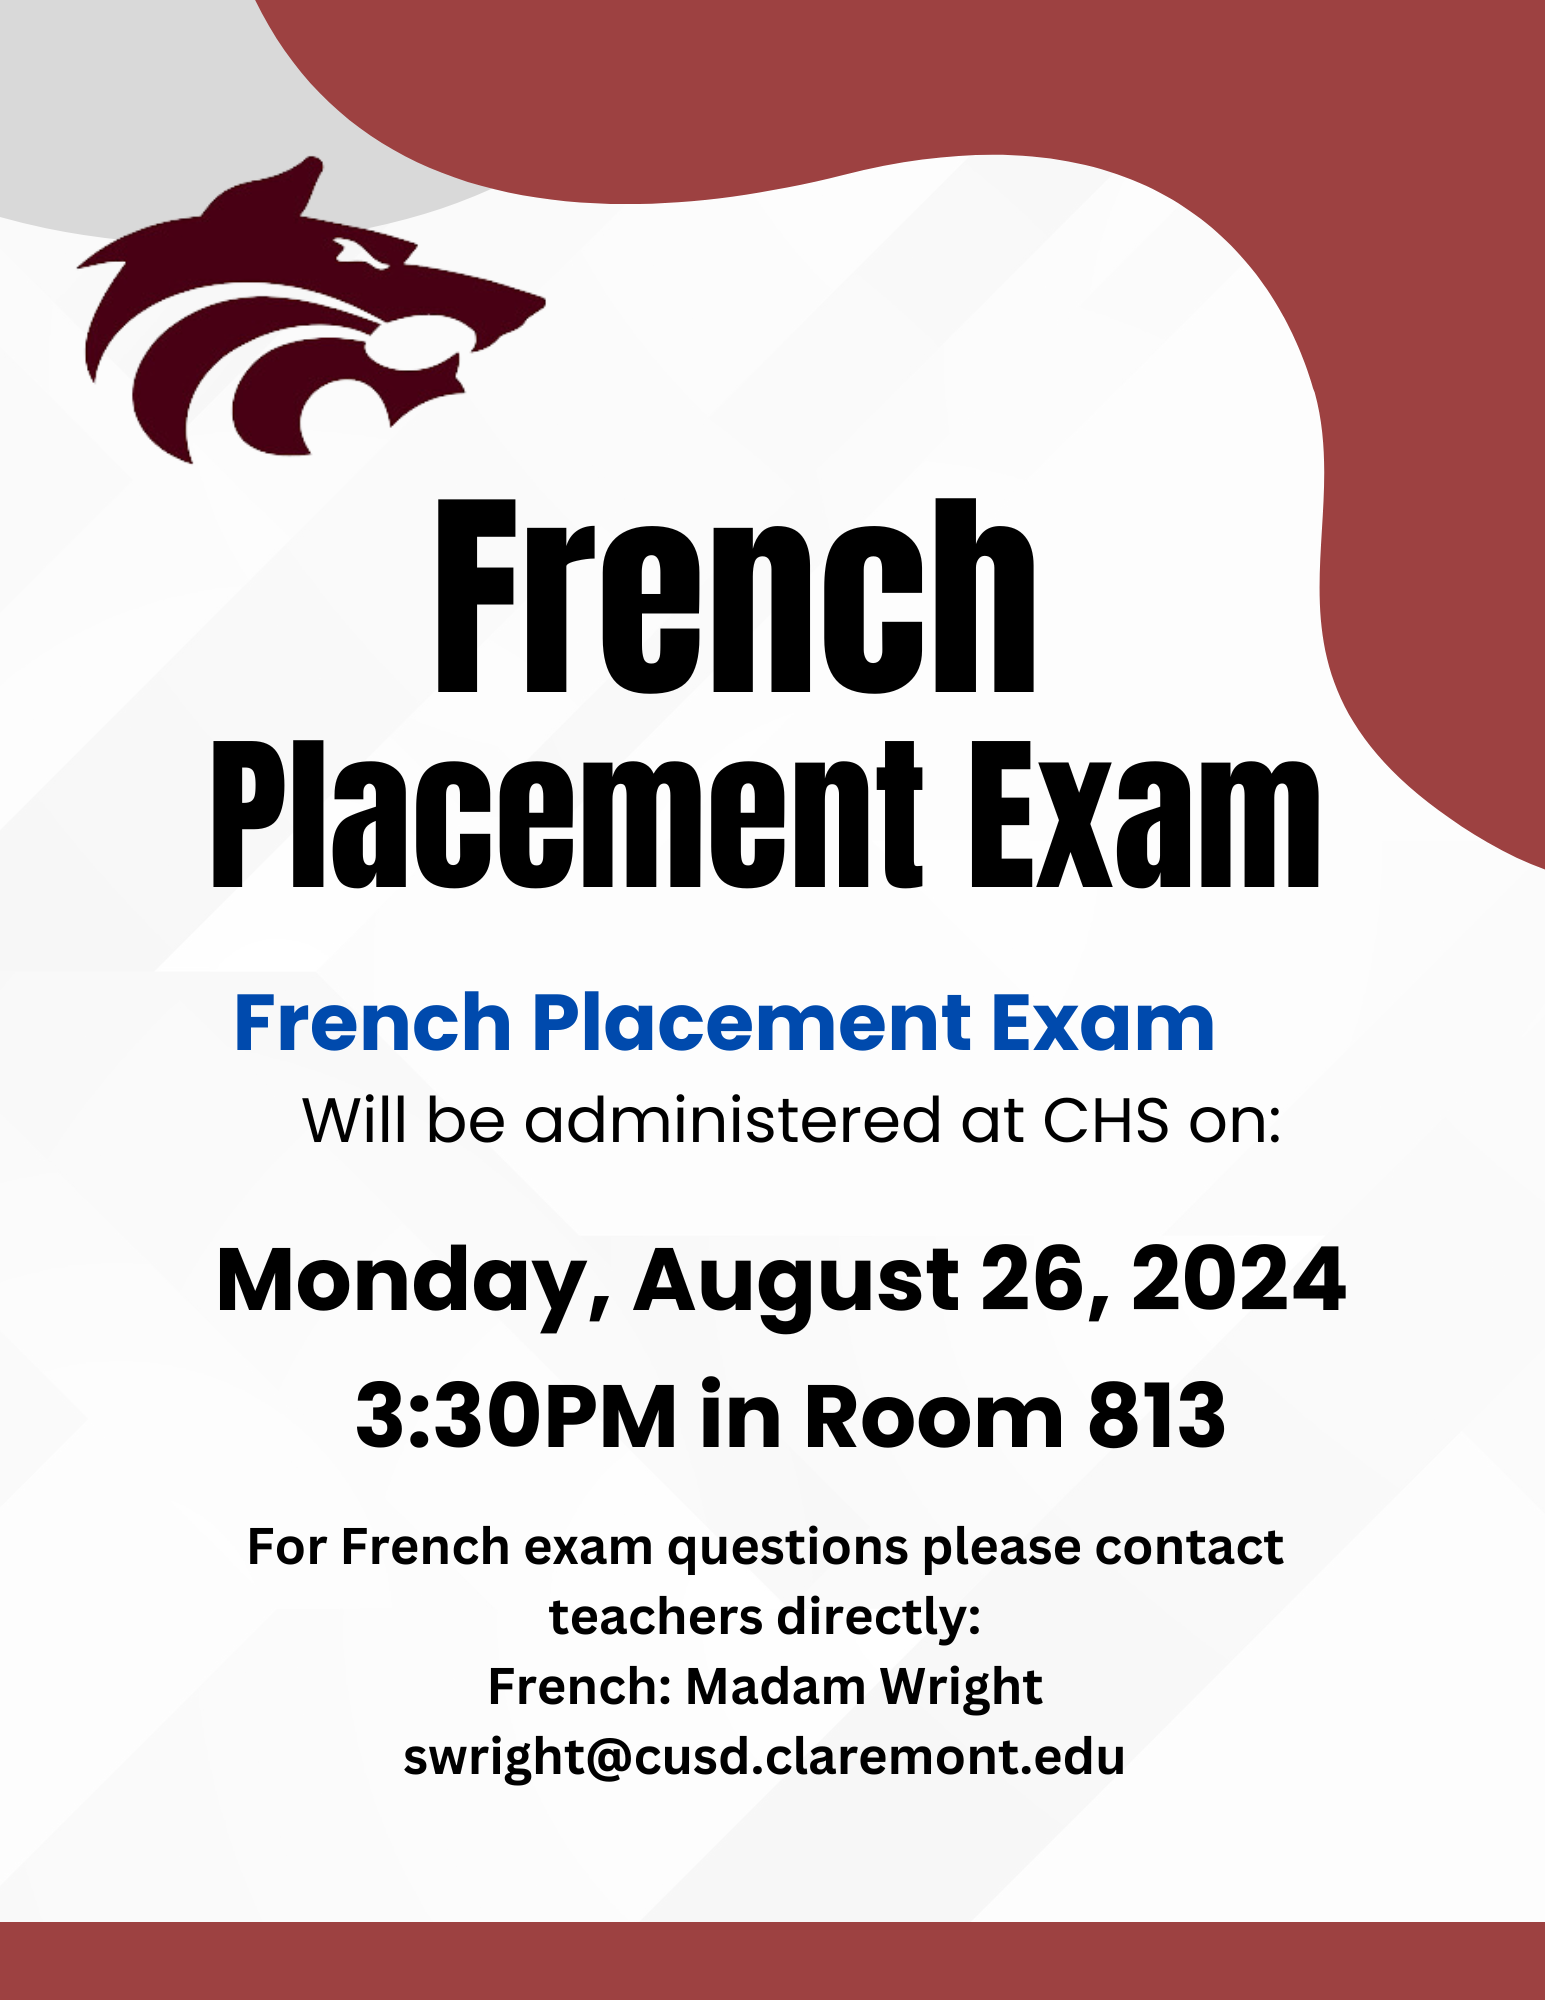 French Placement exam